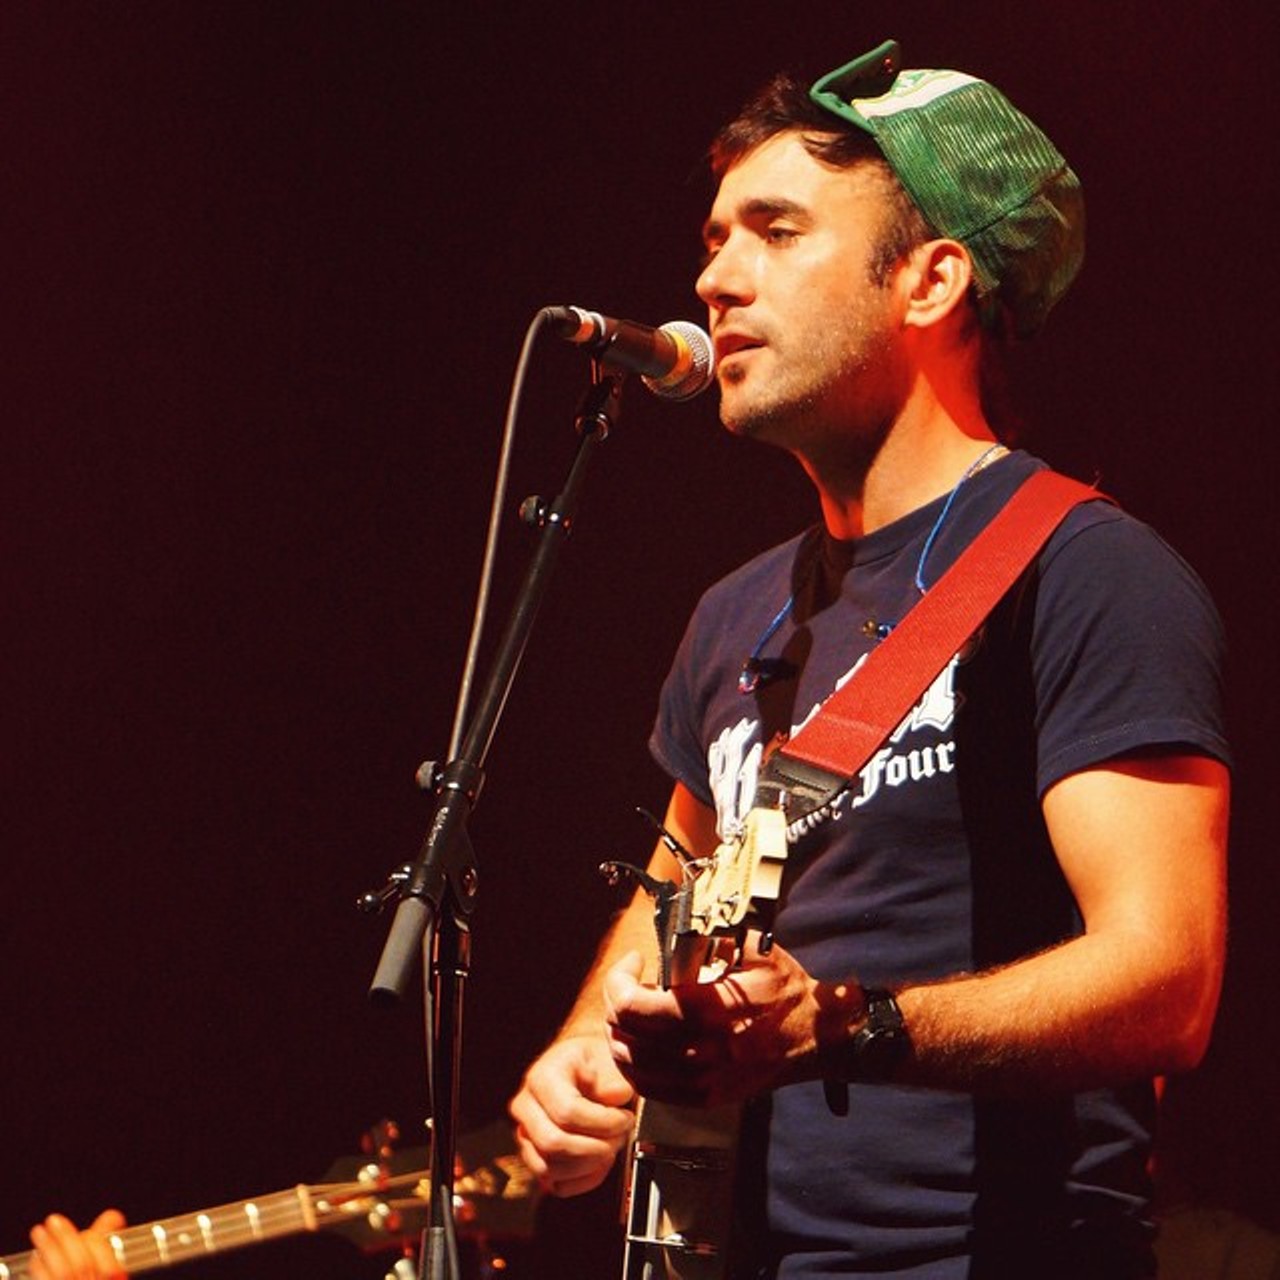 Sufjan Stevens - Stevens is our own little Michigan indie god. Even though he talks about the whole state (on his album about Michigan) he was born in Detroit.
(Photo via Oslomonsoon